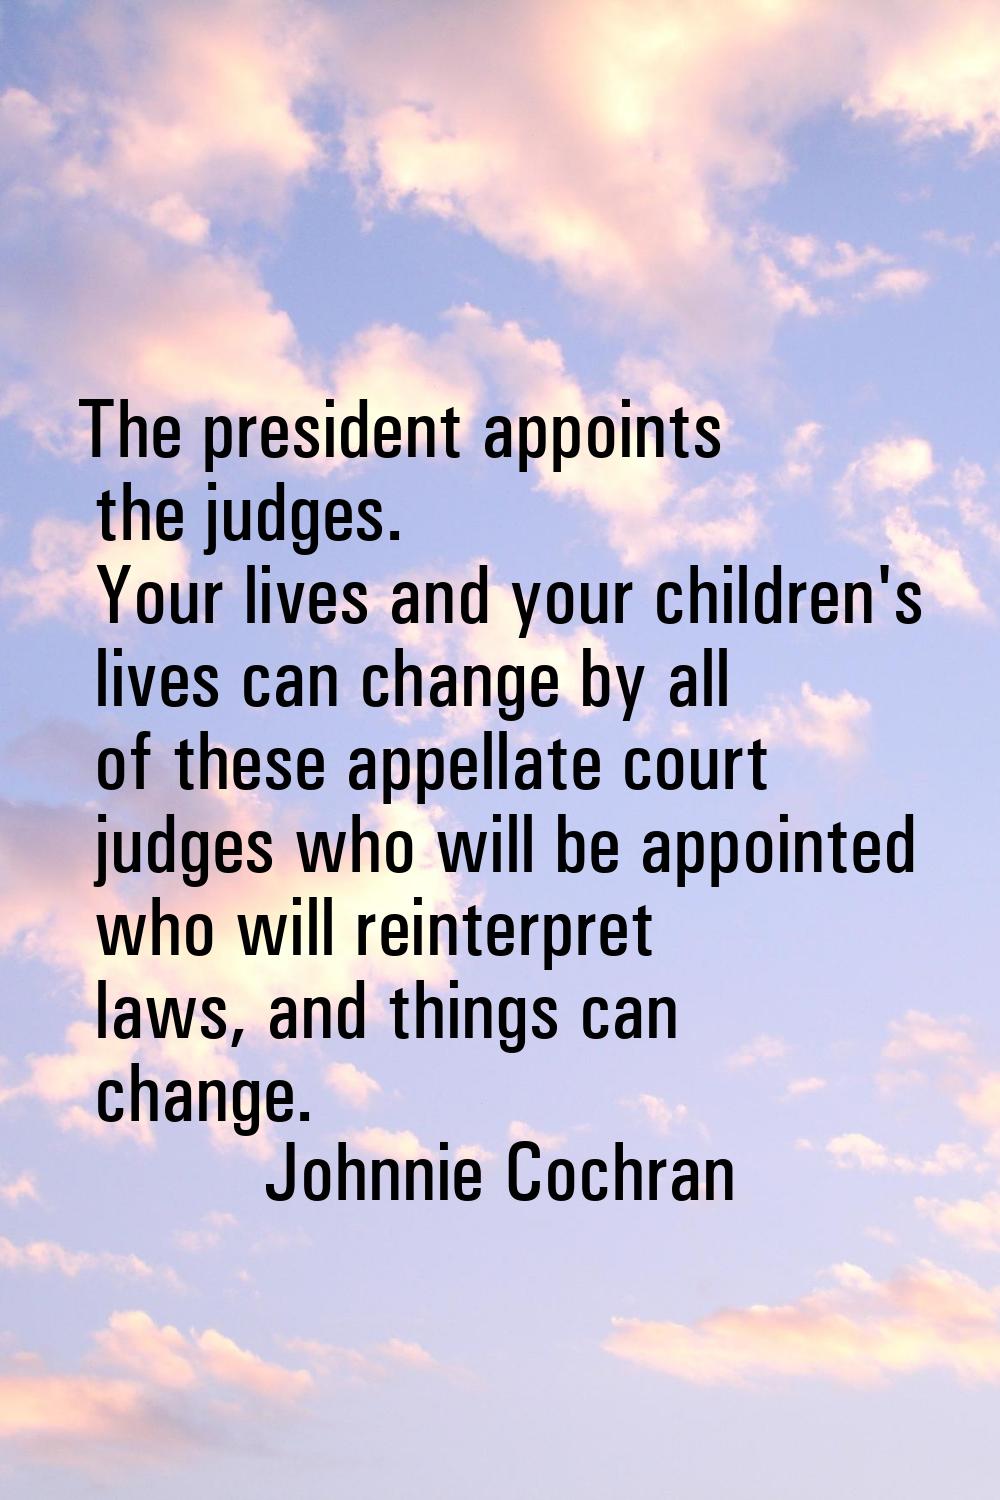 The president appoints the judges. Your lives and your children's lives can change by all of these 